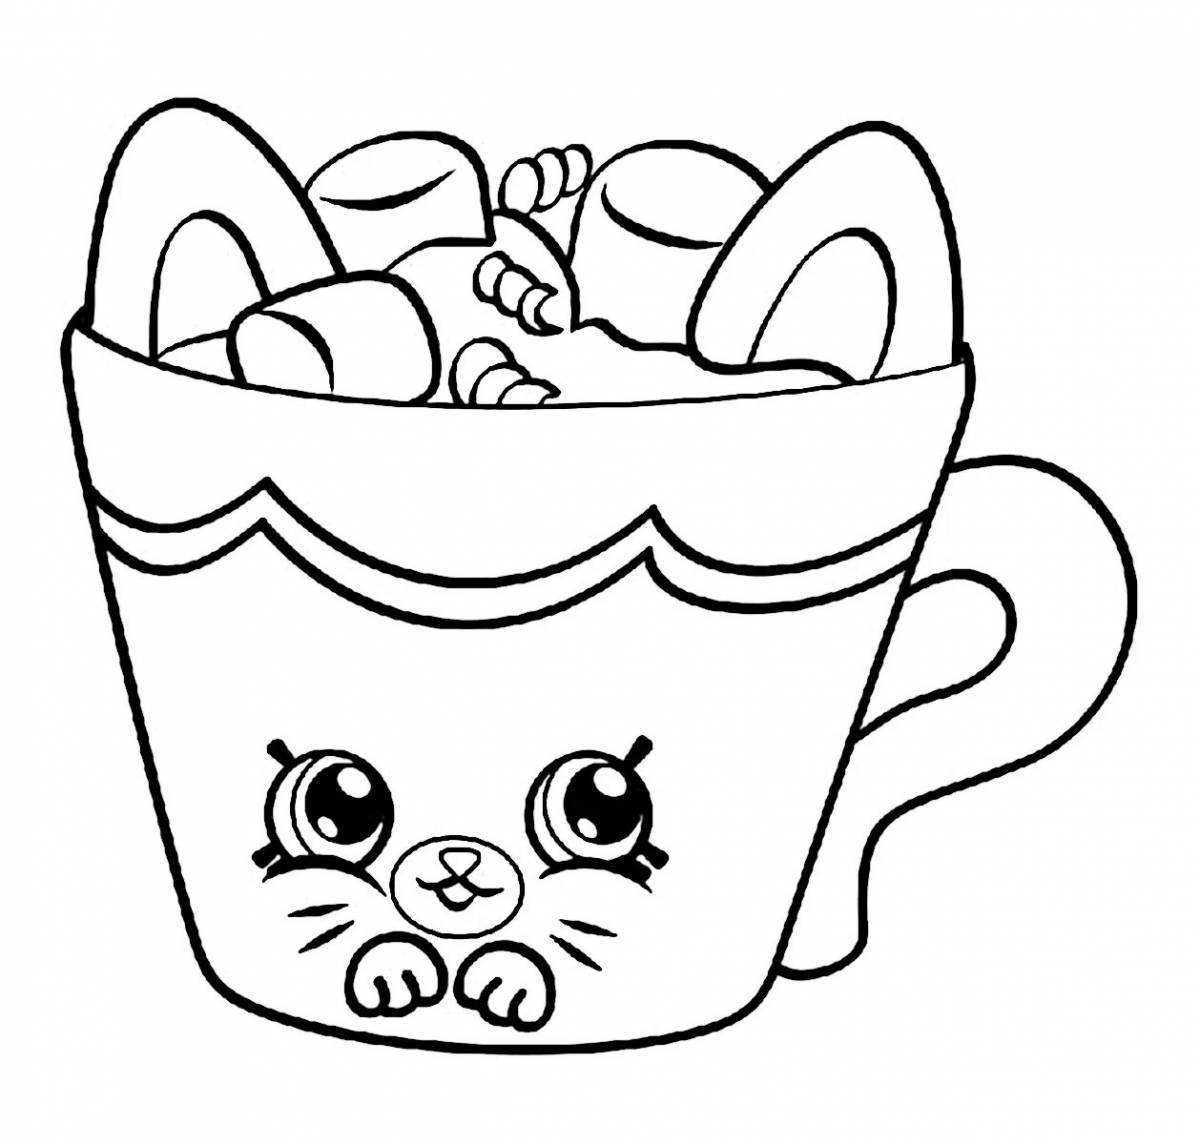 Coloring page napping cat in a cup